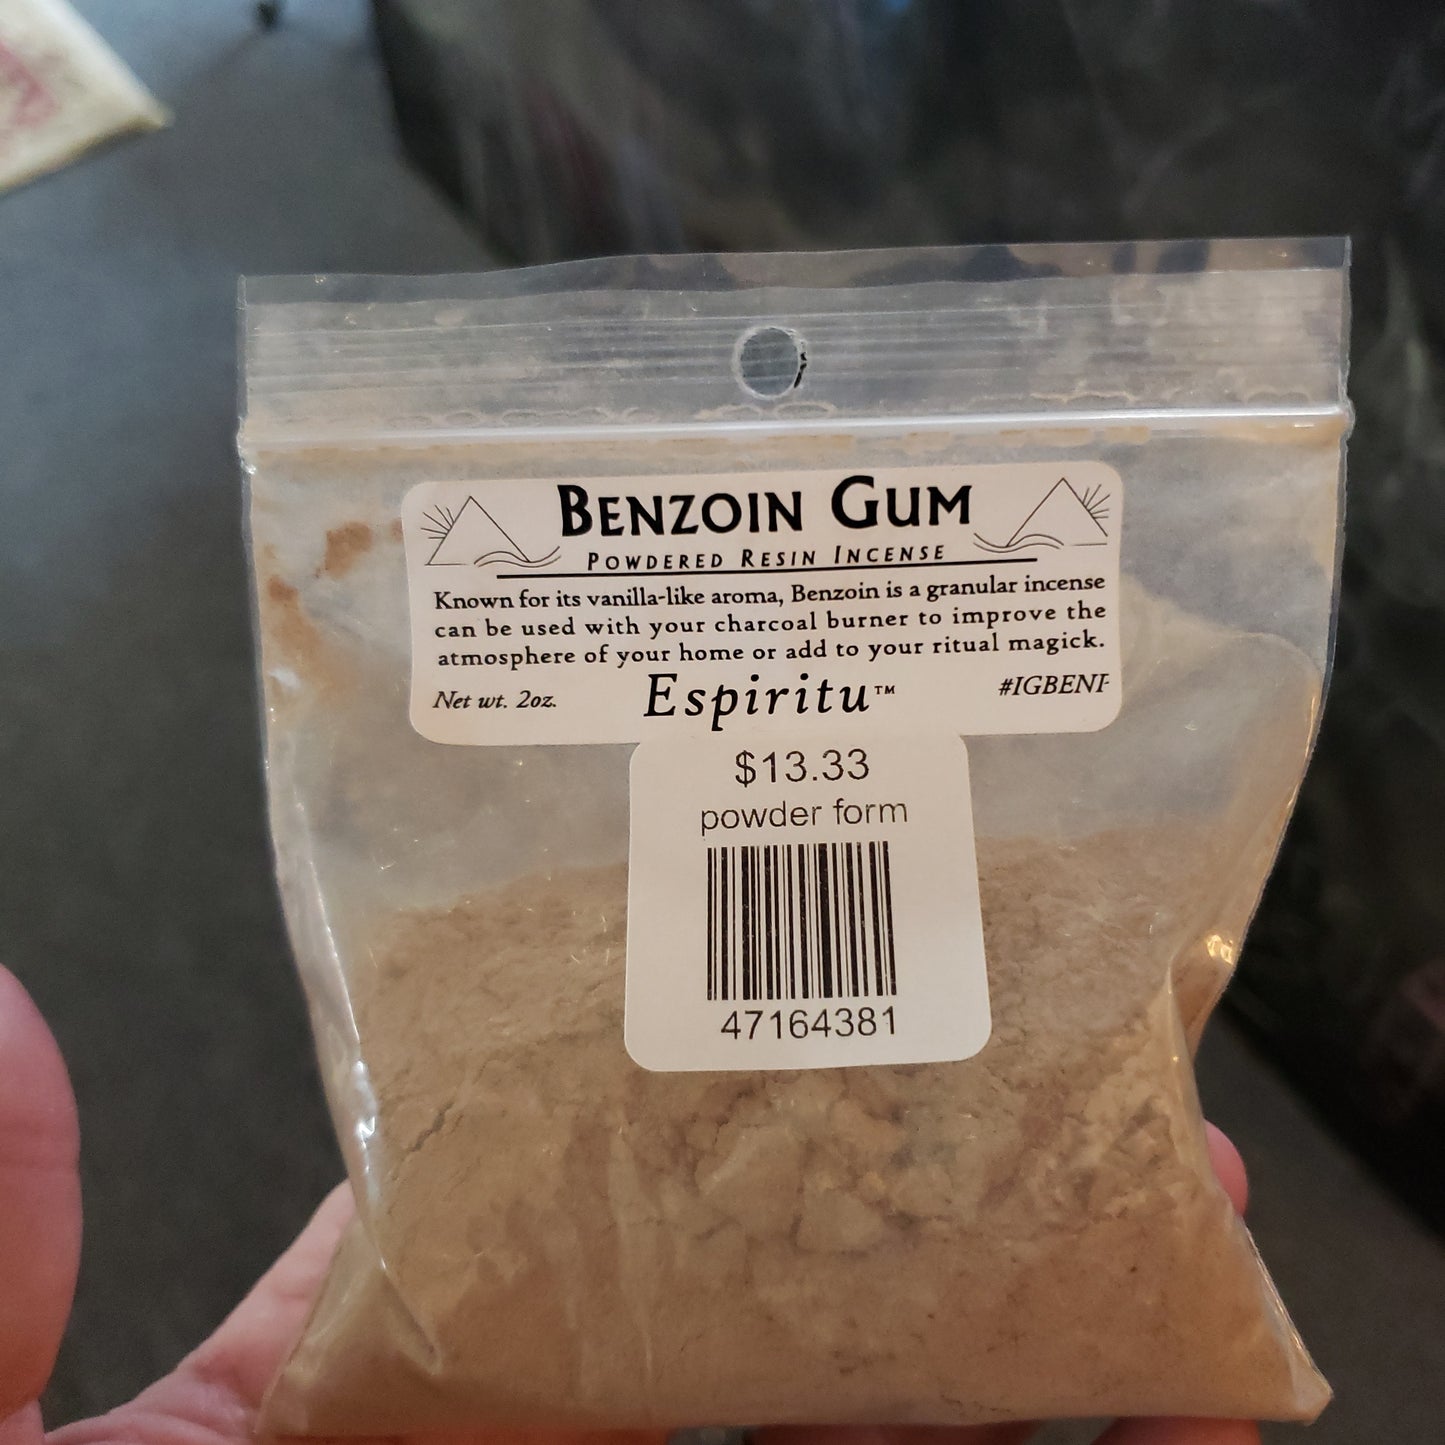 Benzoin Resin Incense in Glass Bottle and Powder Form